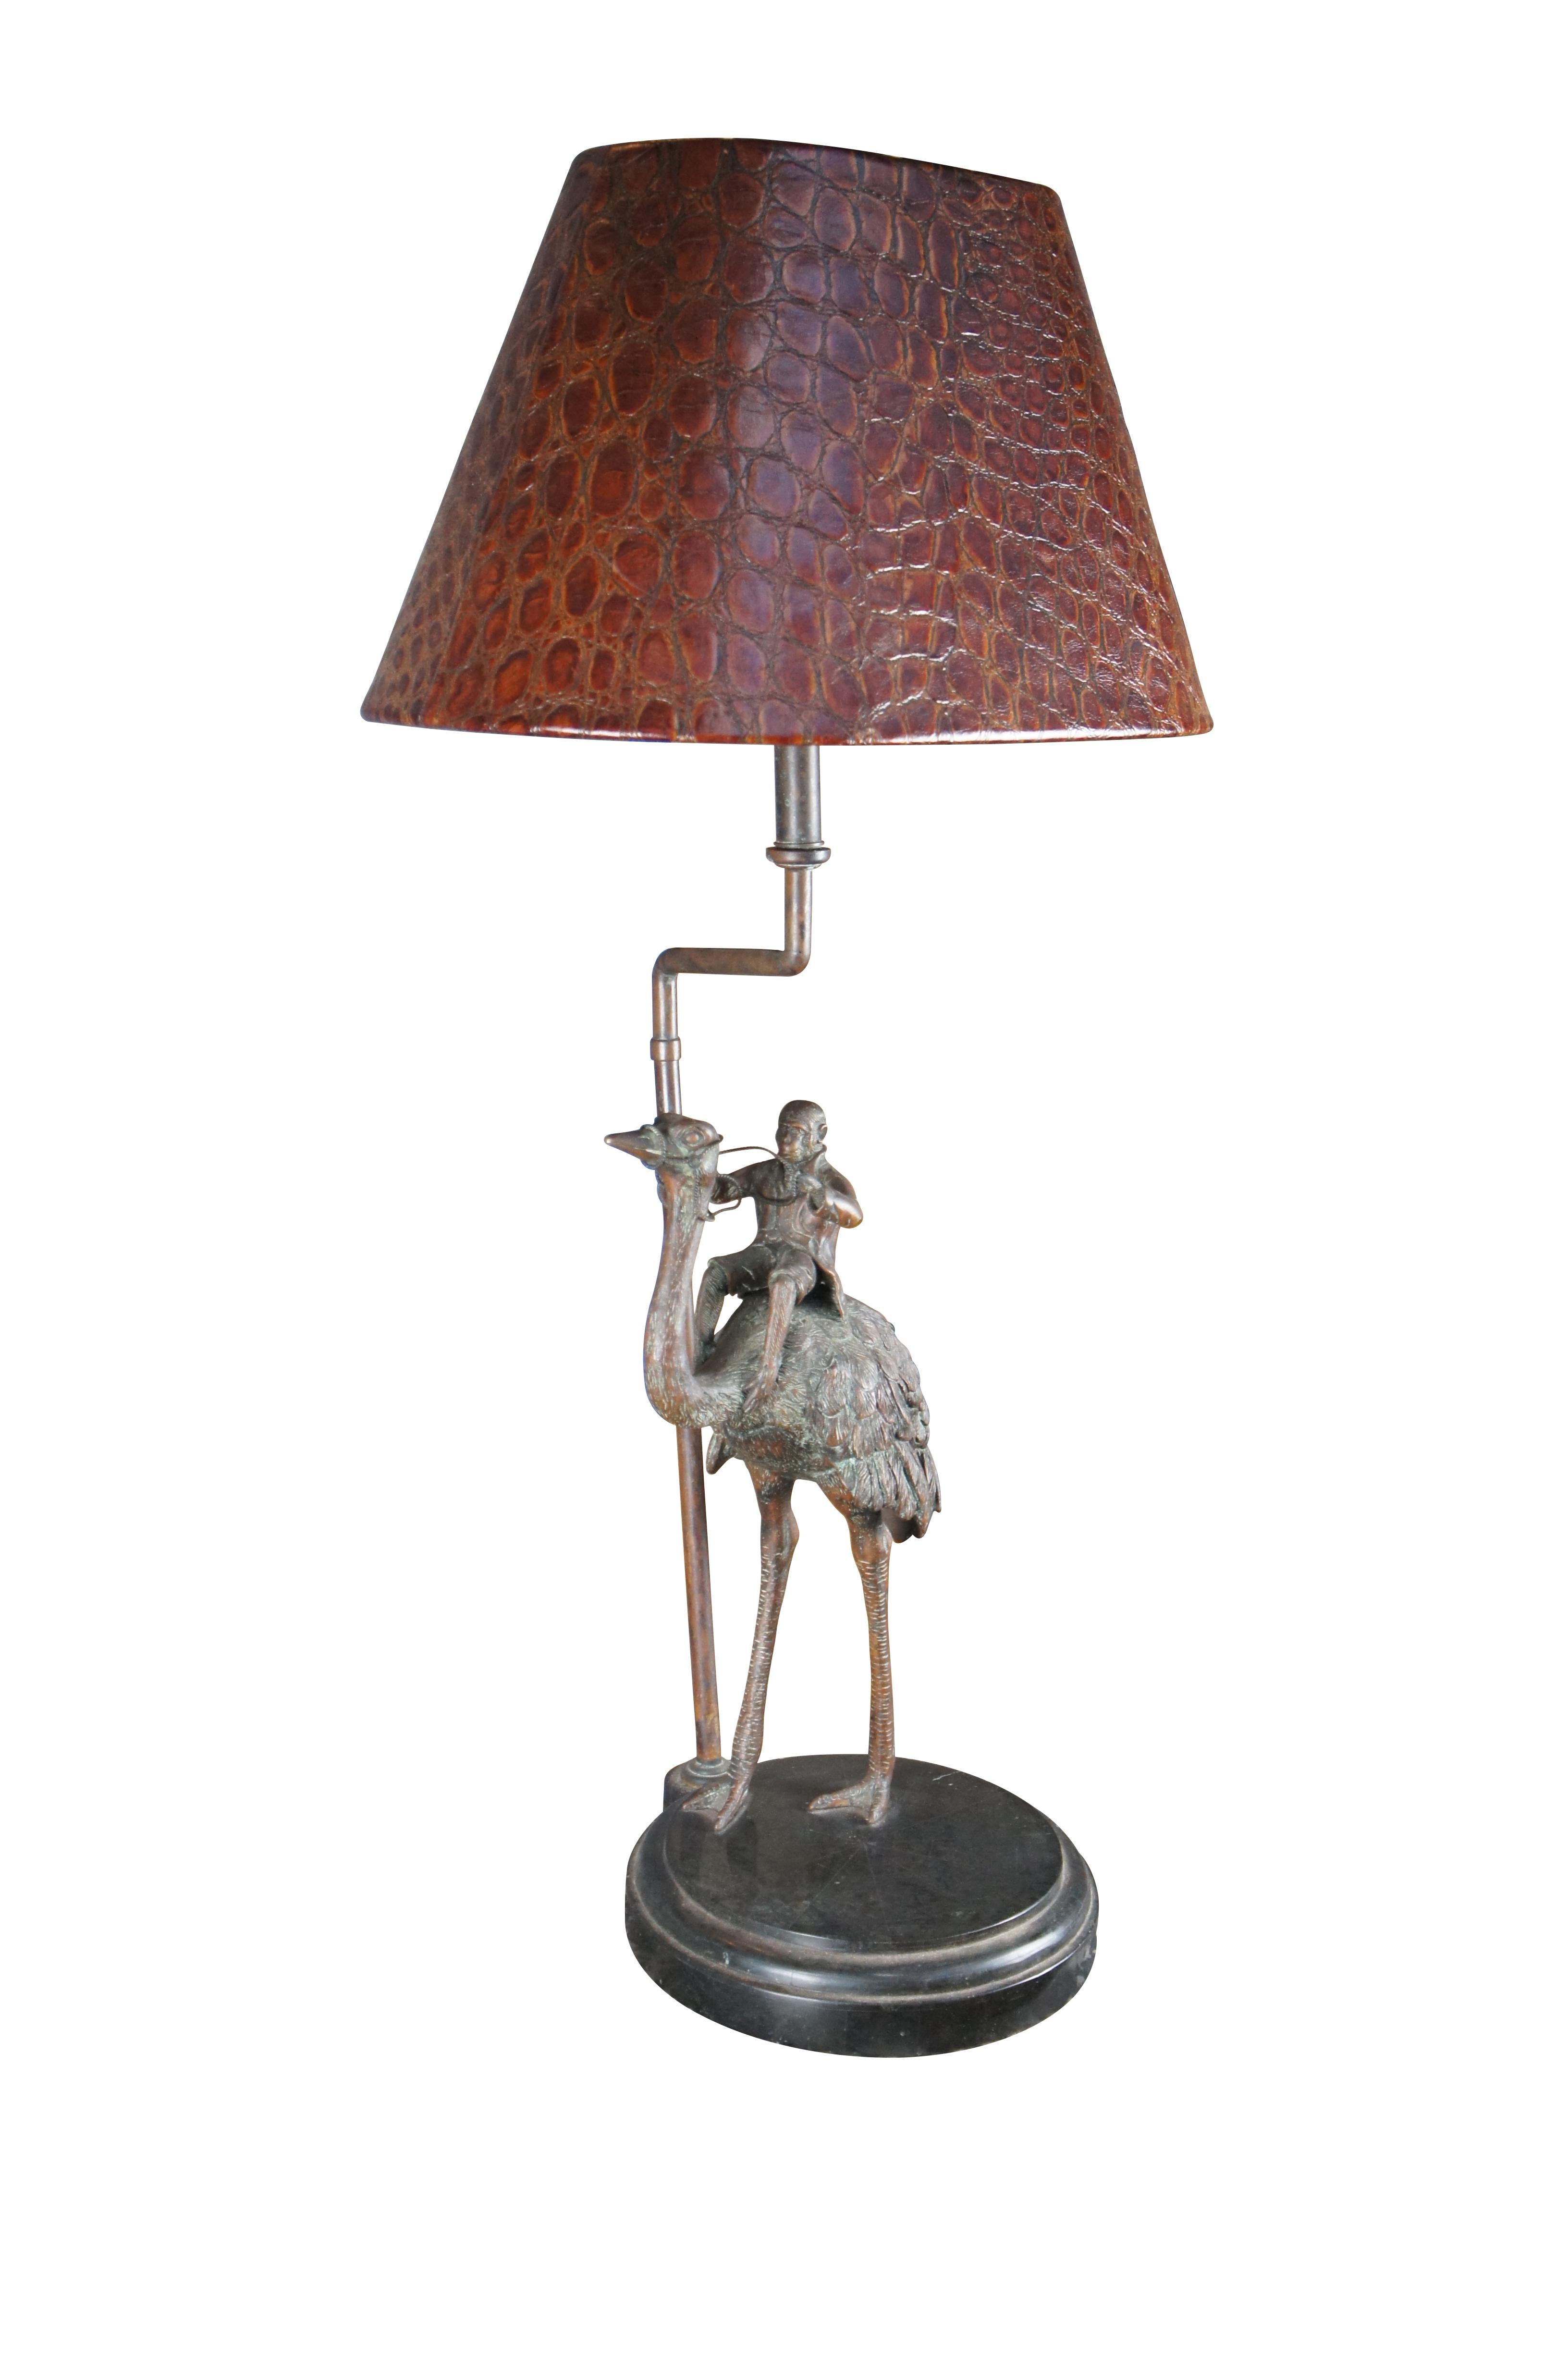 A charming late 20th century table lamp by Maitland Smith. Features a bronze Ostrich carrying a Monkey. The bronze is over a round tessellated marble base and includes a embossed ostrich pattern leather shade.

Dimensions:
39